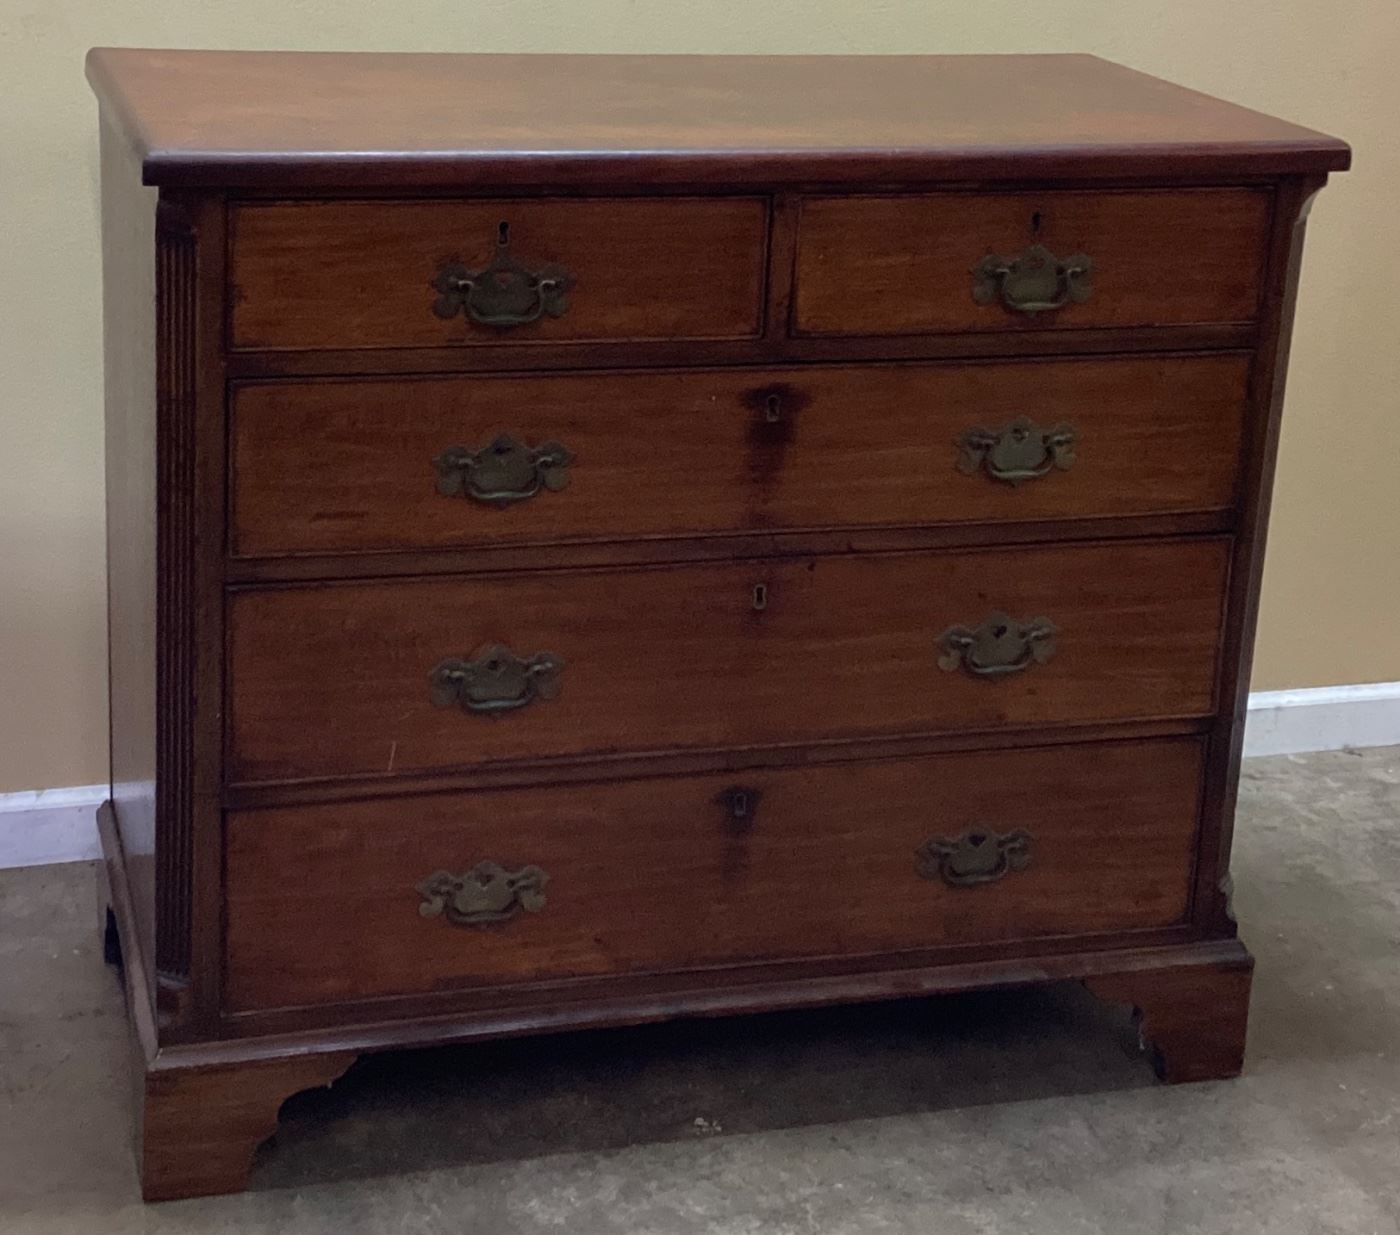 19th CENTURY CHIPPENDALE STYLE MAHOGANY CHEST OF DRAWERS